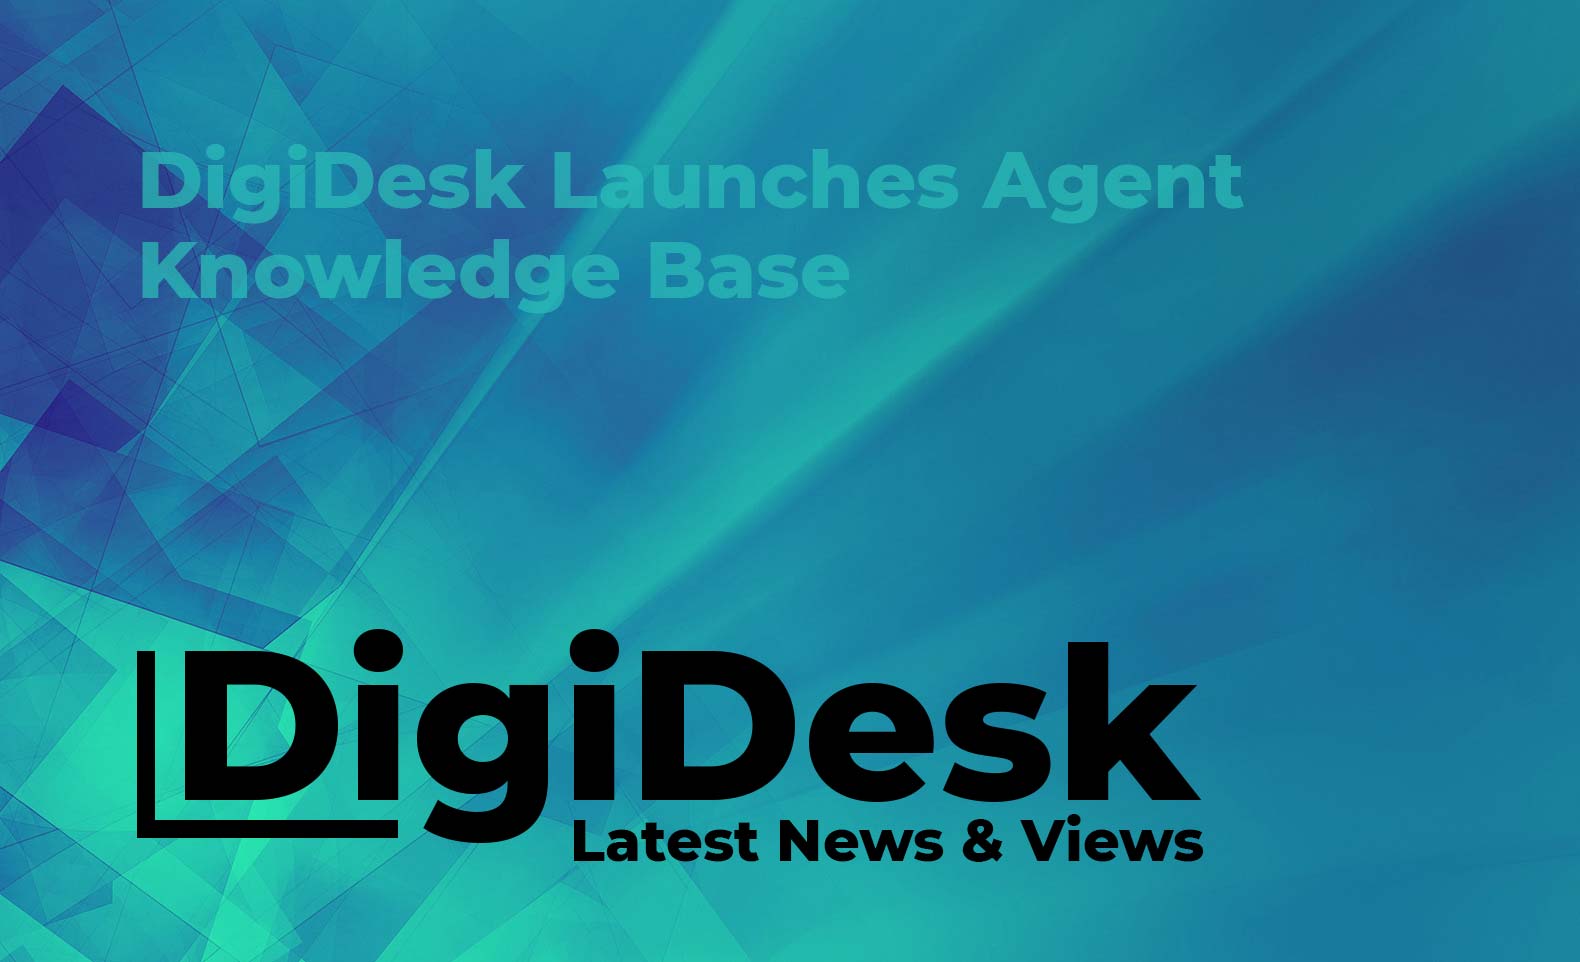 Blog banner - DigiDesk launches Agent Knowledge Base